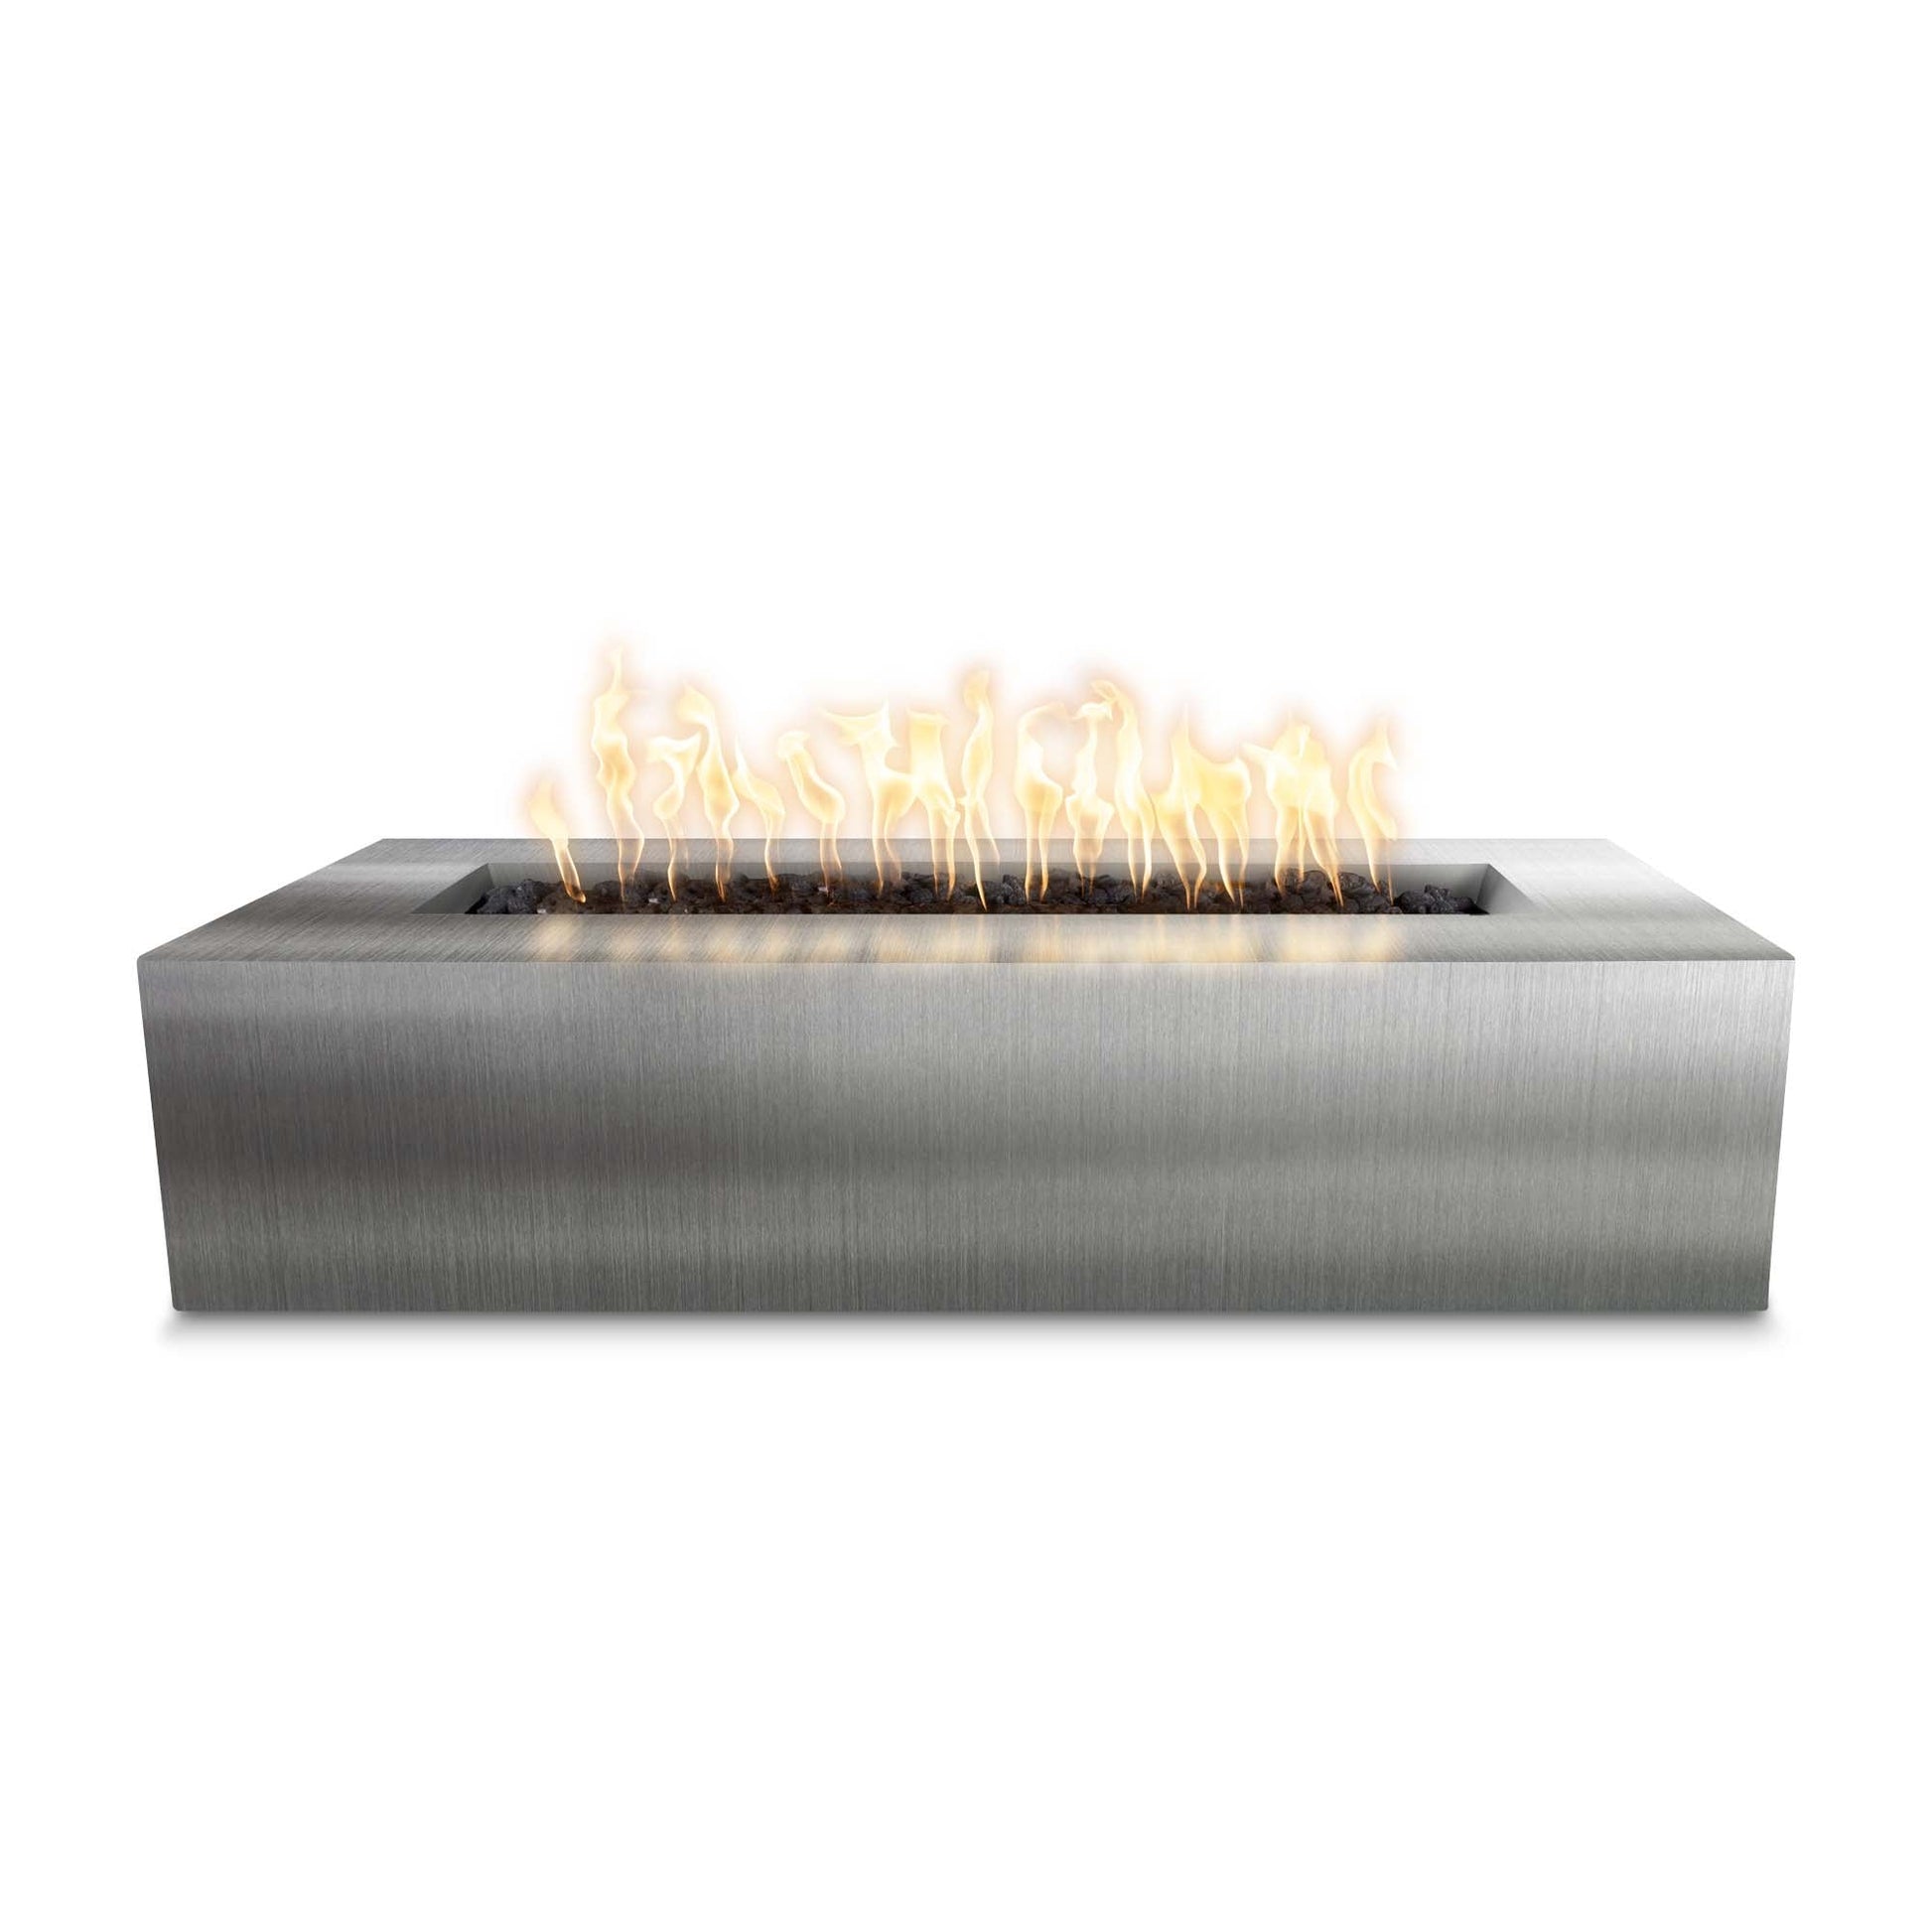 The Outdoor Plus Rectangular Regal 60" Hammered Copper Liquid Propane Fire Pit with Match Lit Ignition